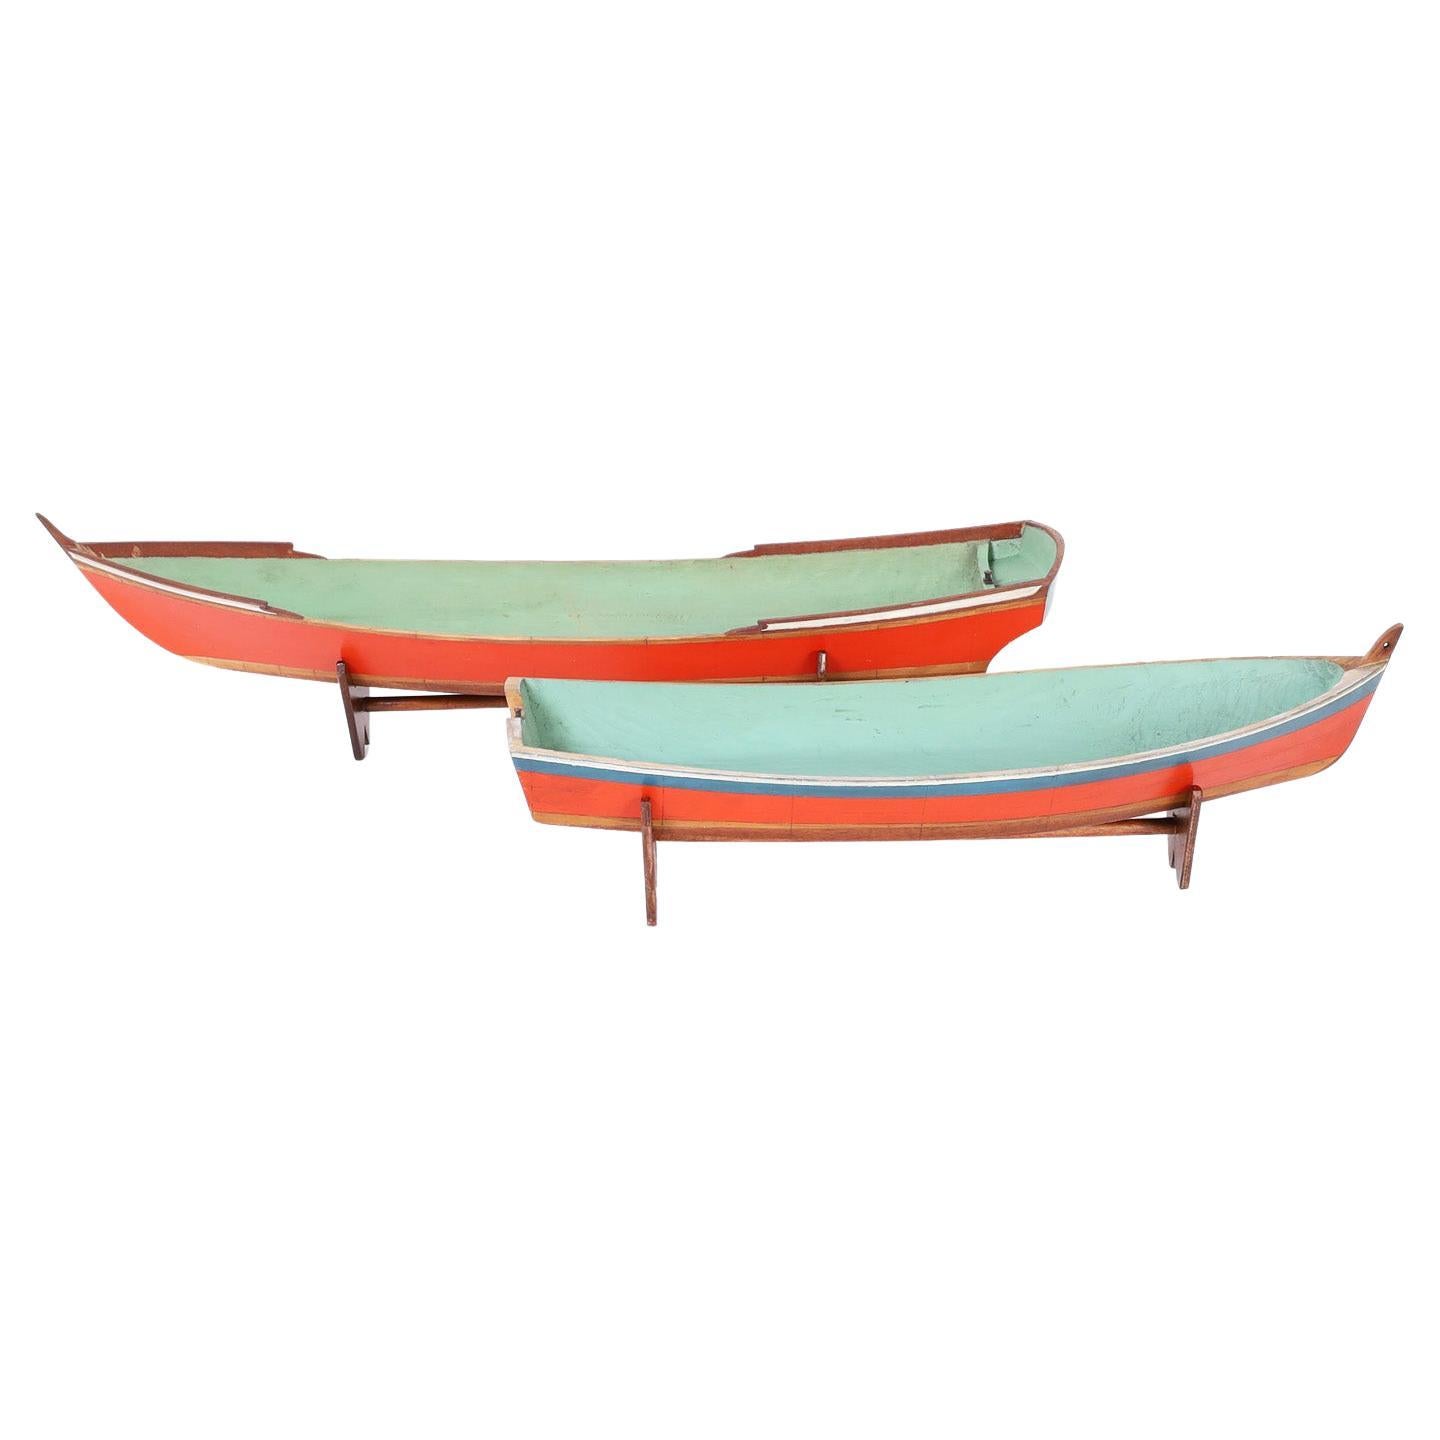 Two Similar Antique Motor Boat Models, Priced Individually For Sale